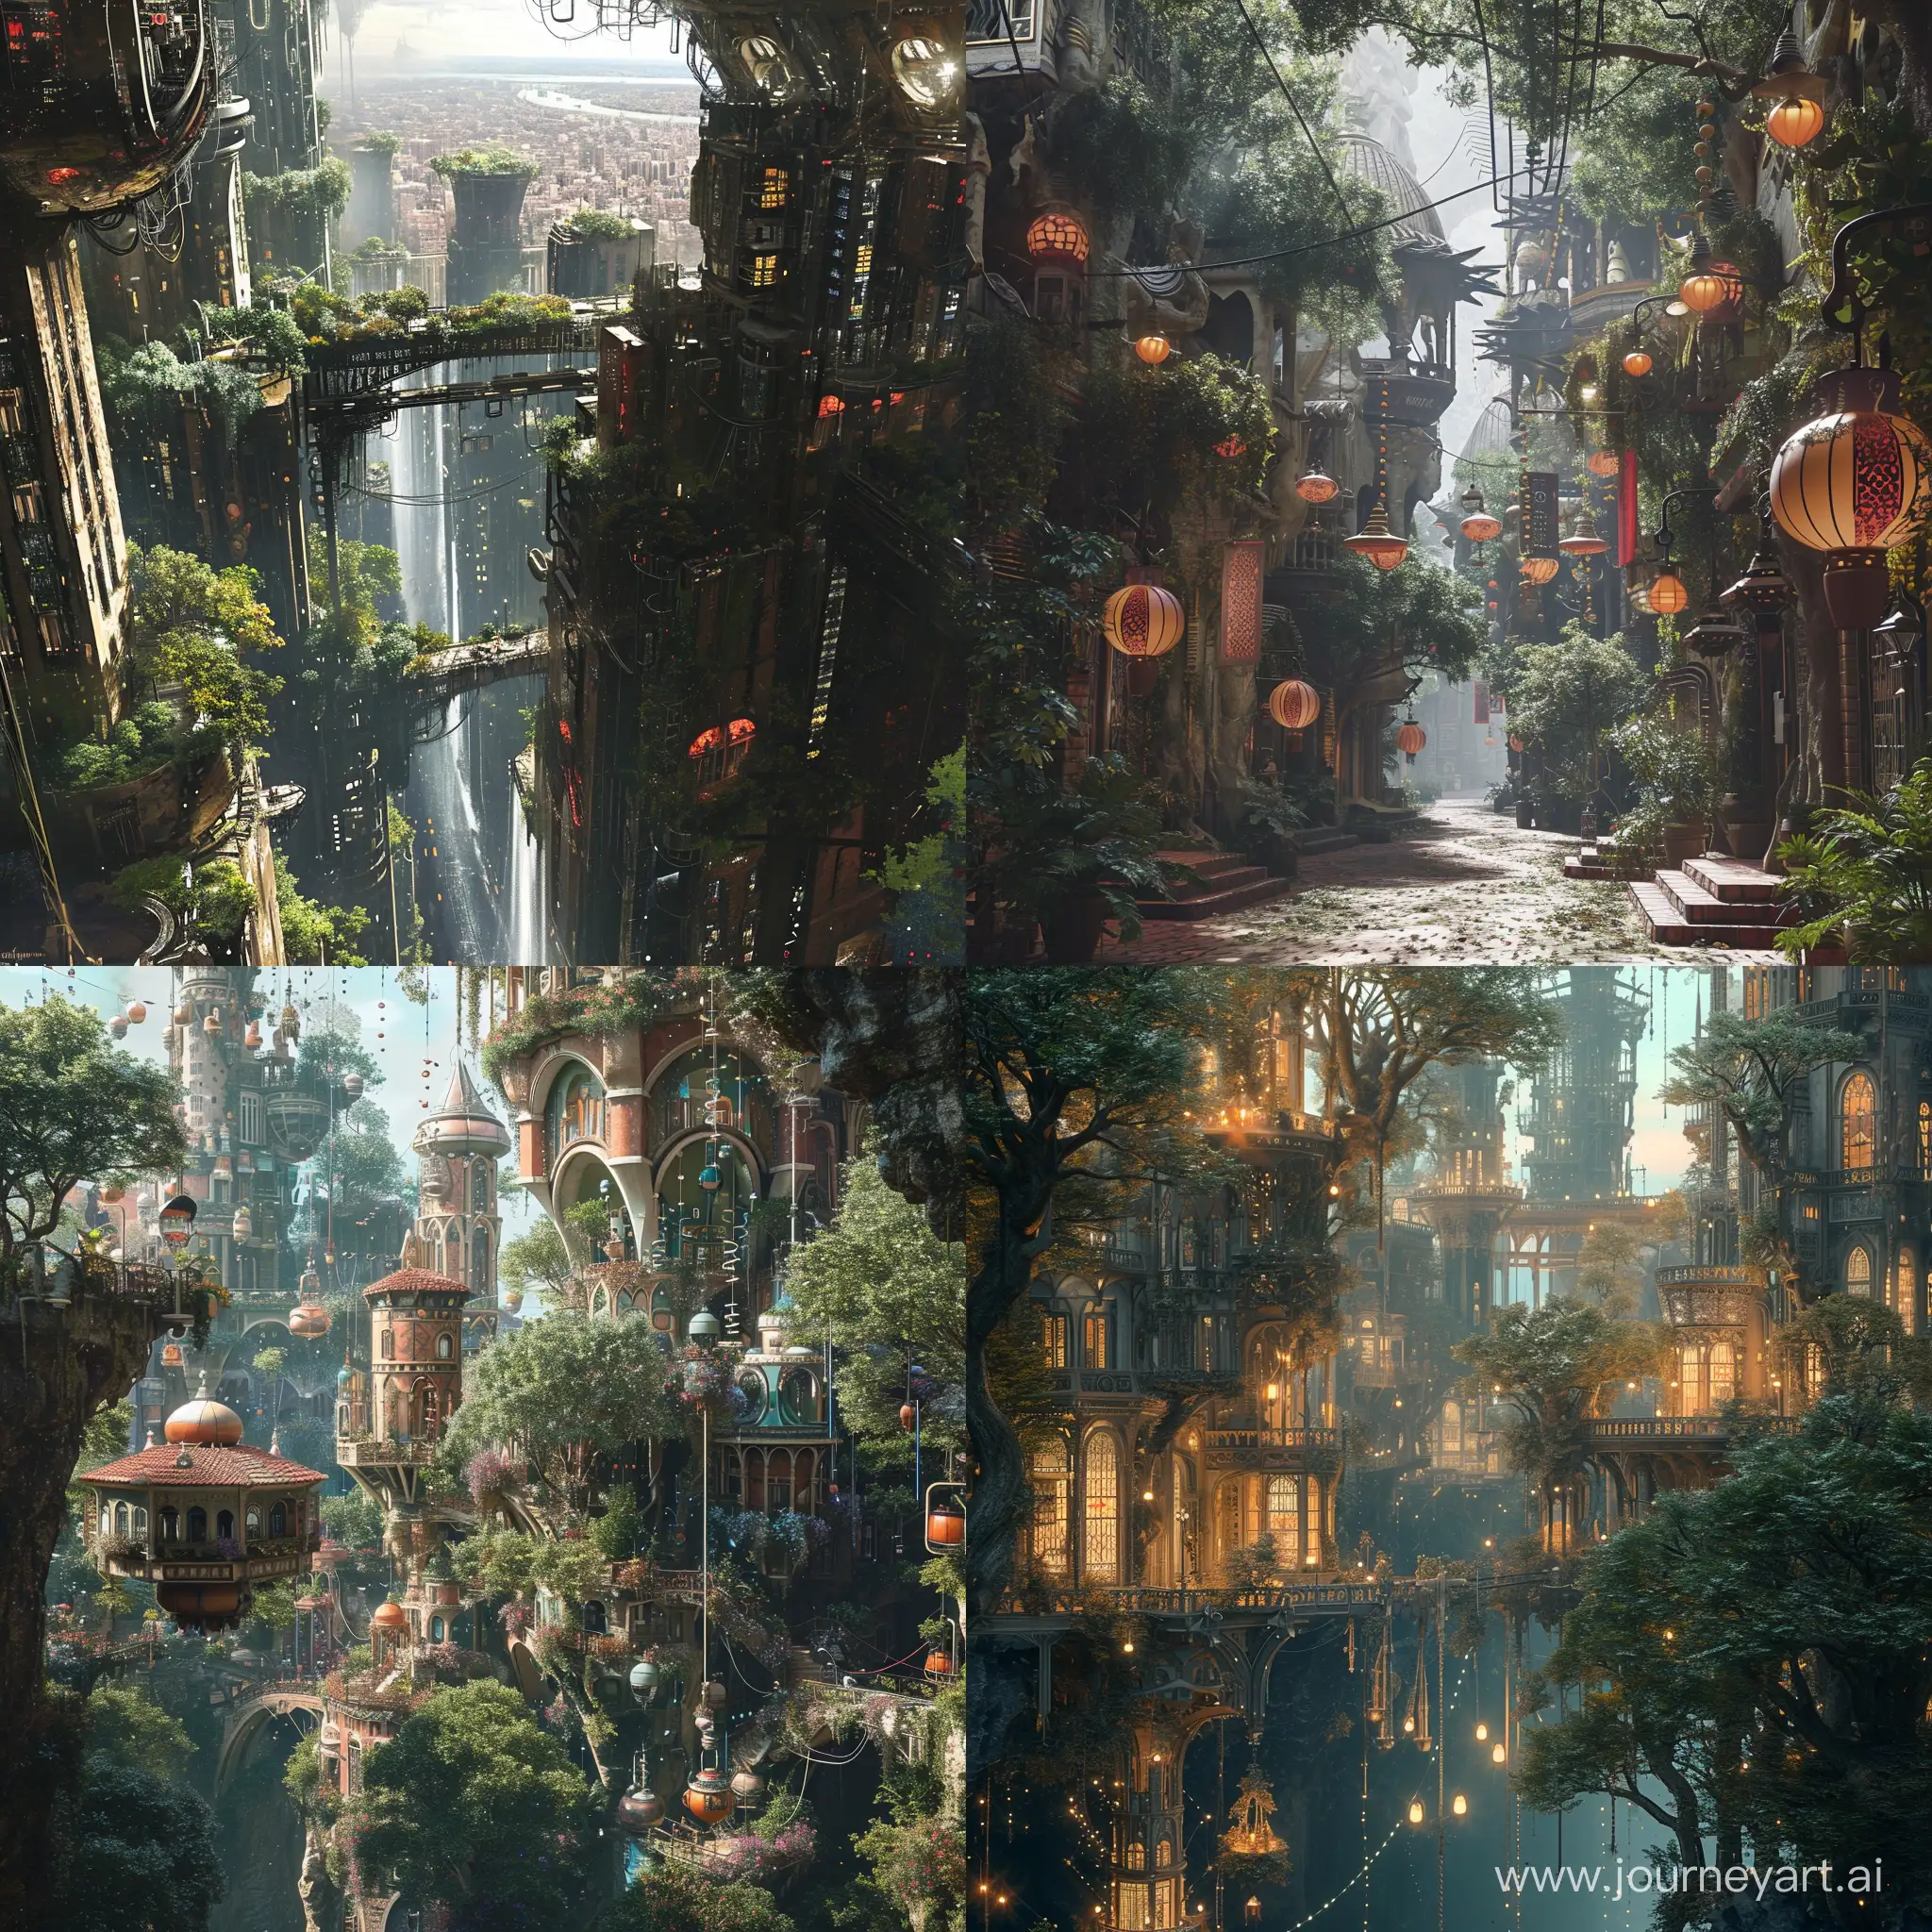 Fantastical-Cityscape-with-Lush-Greenery-and-Hanging-Lanterns